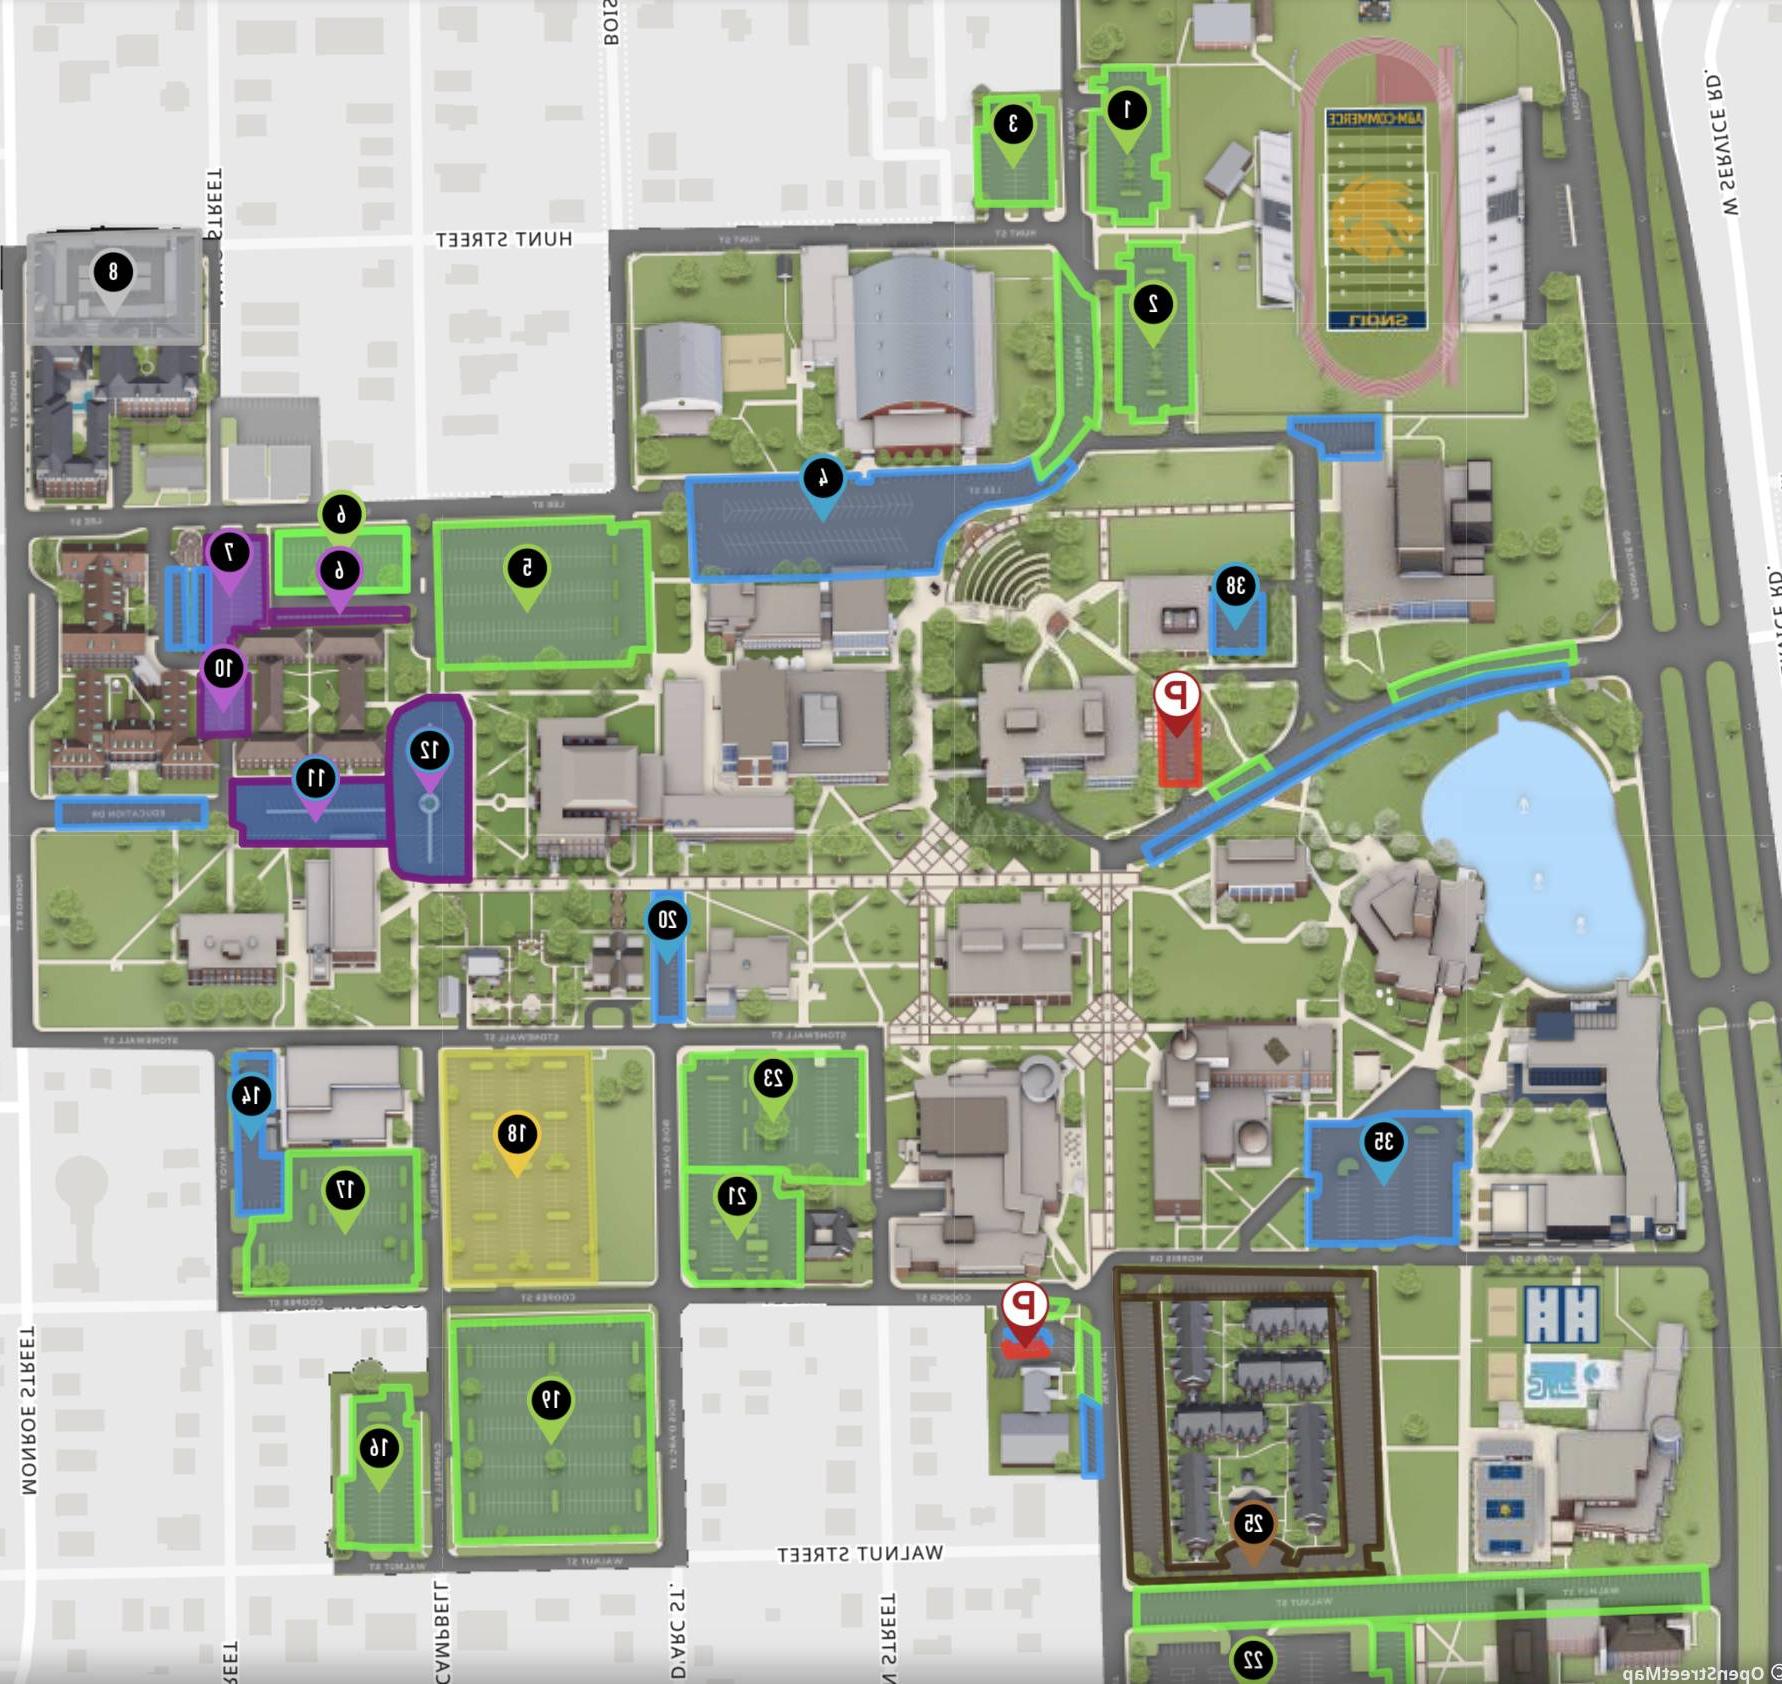 Campus map with parking lots outlined.